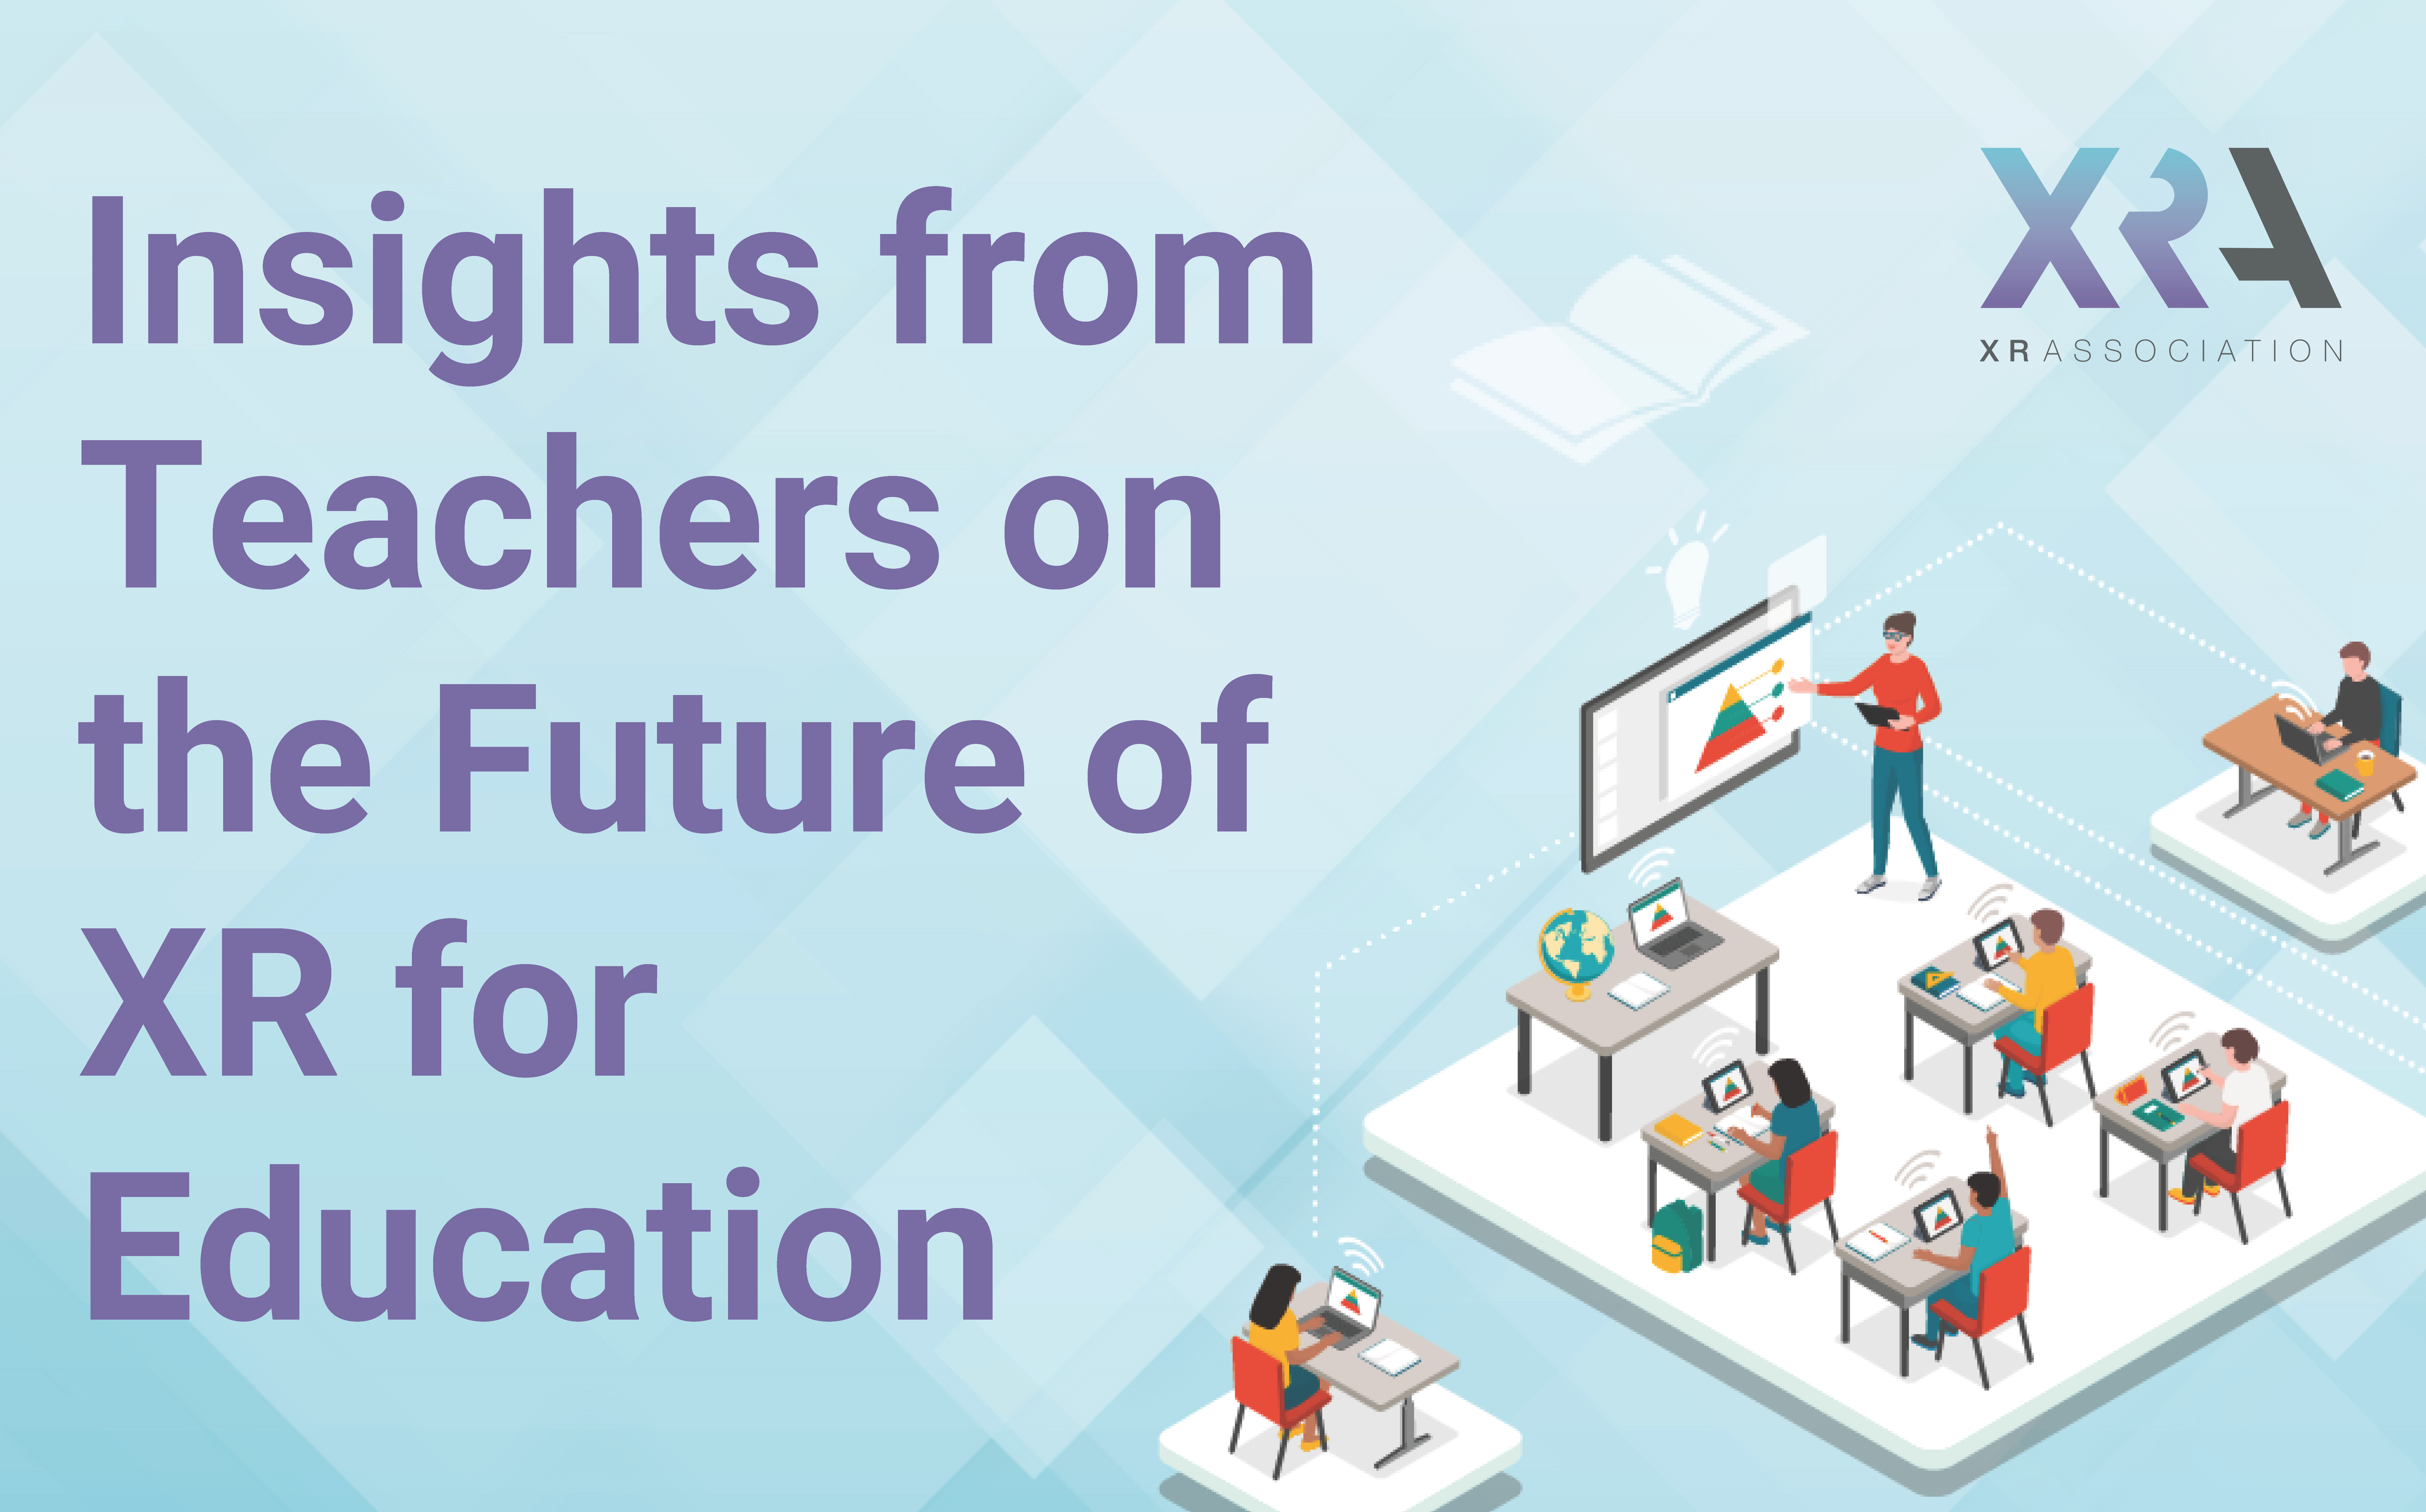 SURVEY OF U.S. EDUCATORS SUGGESTS XR TECHNOLOGY IS A VIABLE SOLUTION FOR AMERICA’S CLASSROOMS